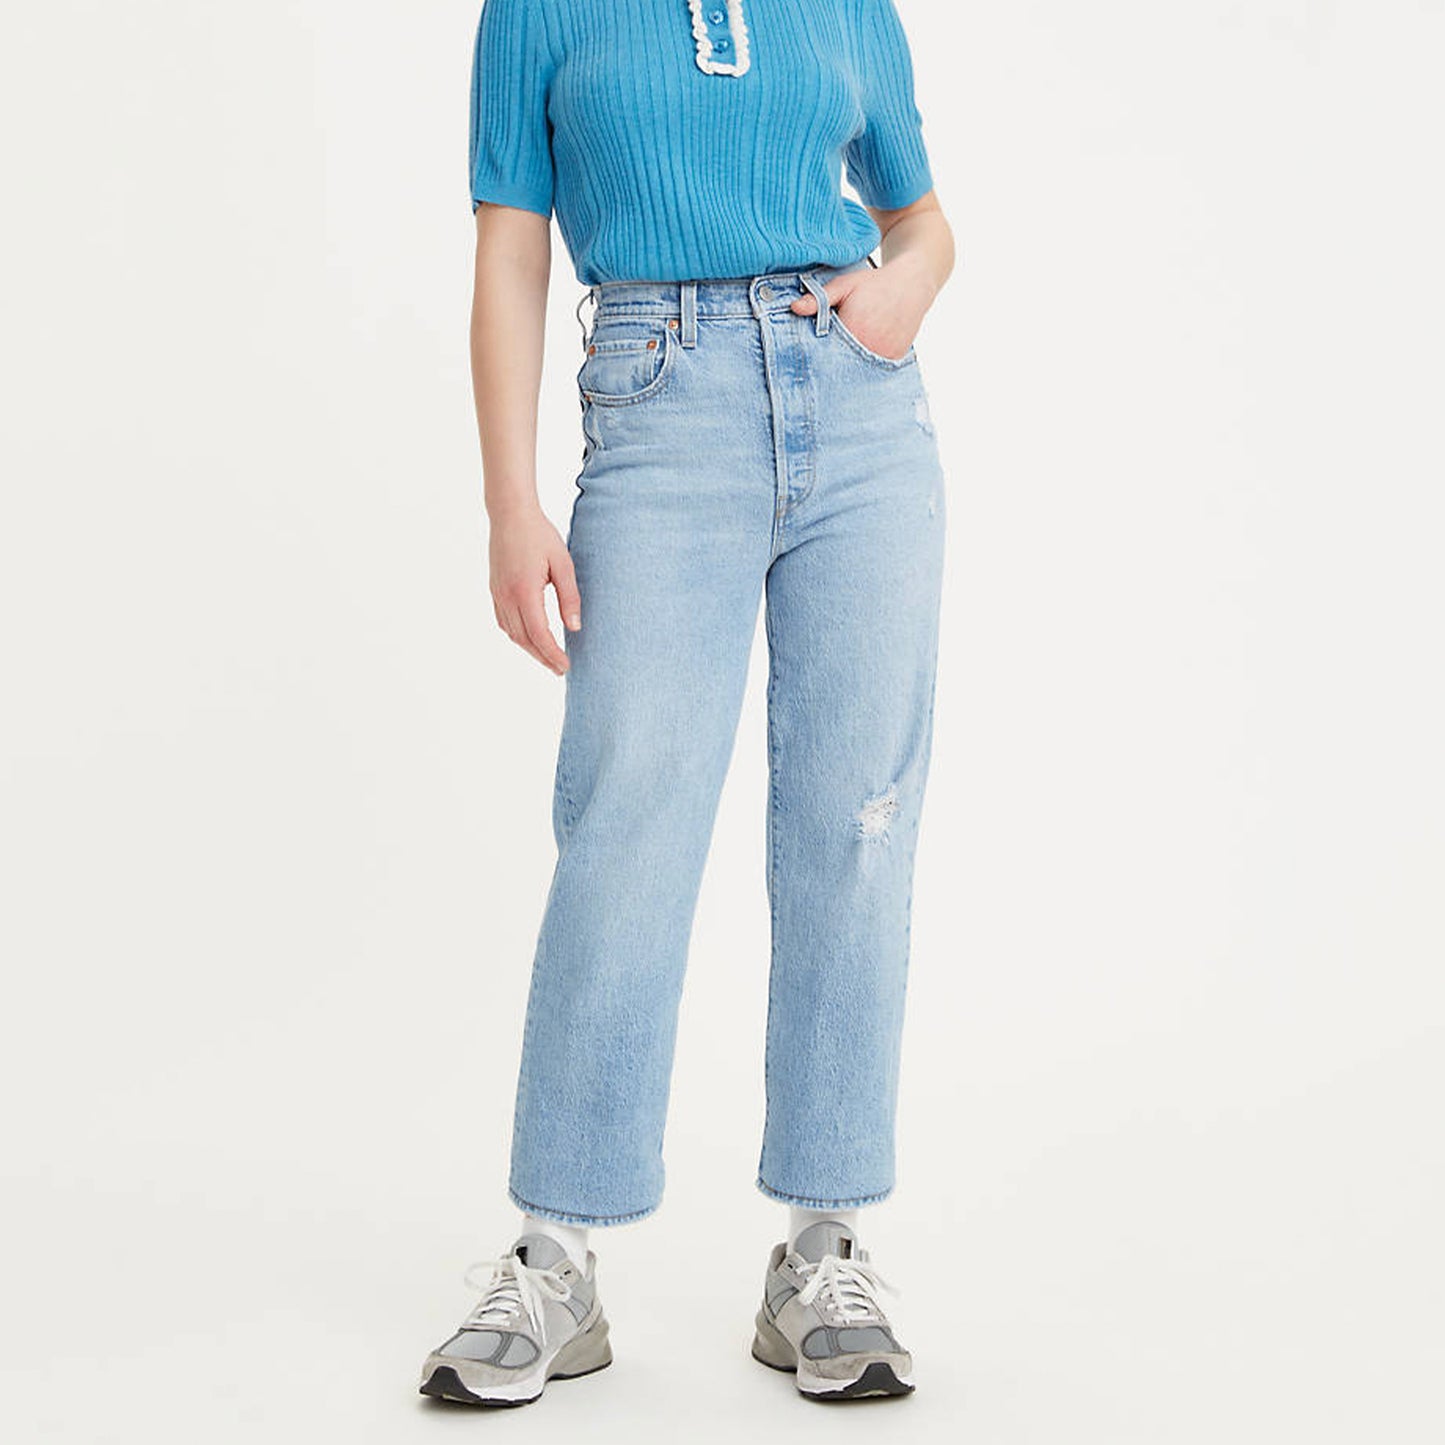 Levi's Ribcage Straight Ankle. With its soaring 12-inch rise, this jean has become a hip-slimming, waist-defining, leg-lengthening obsession. This fit will show off your figure and make you feel just as amazing as you look